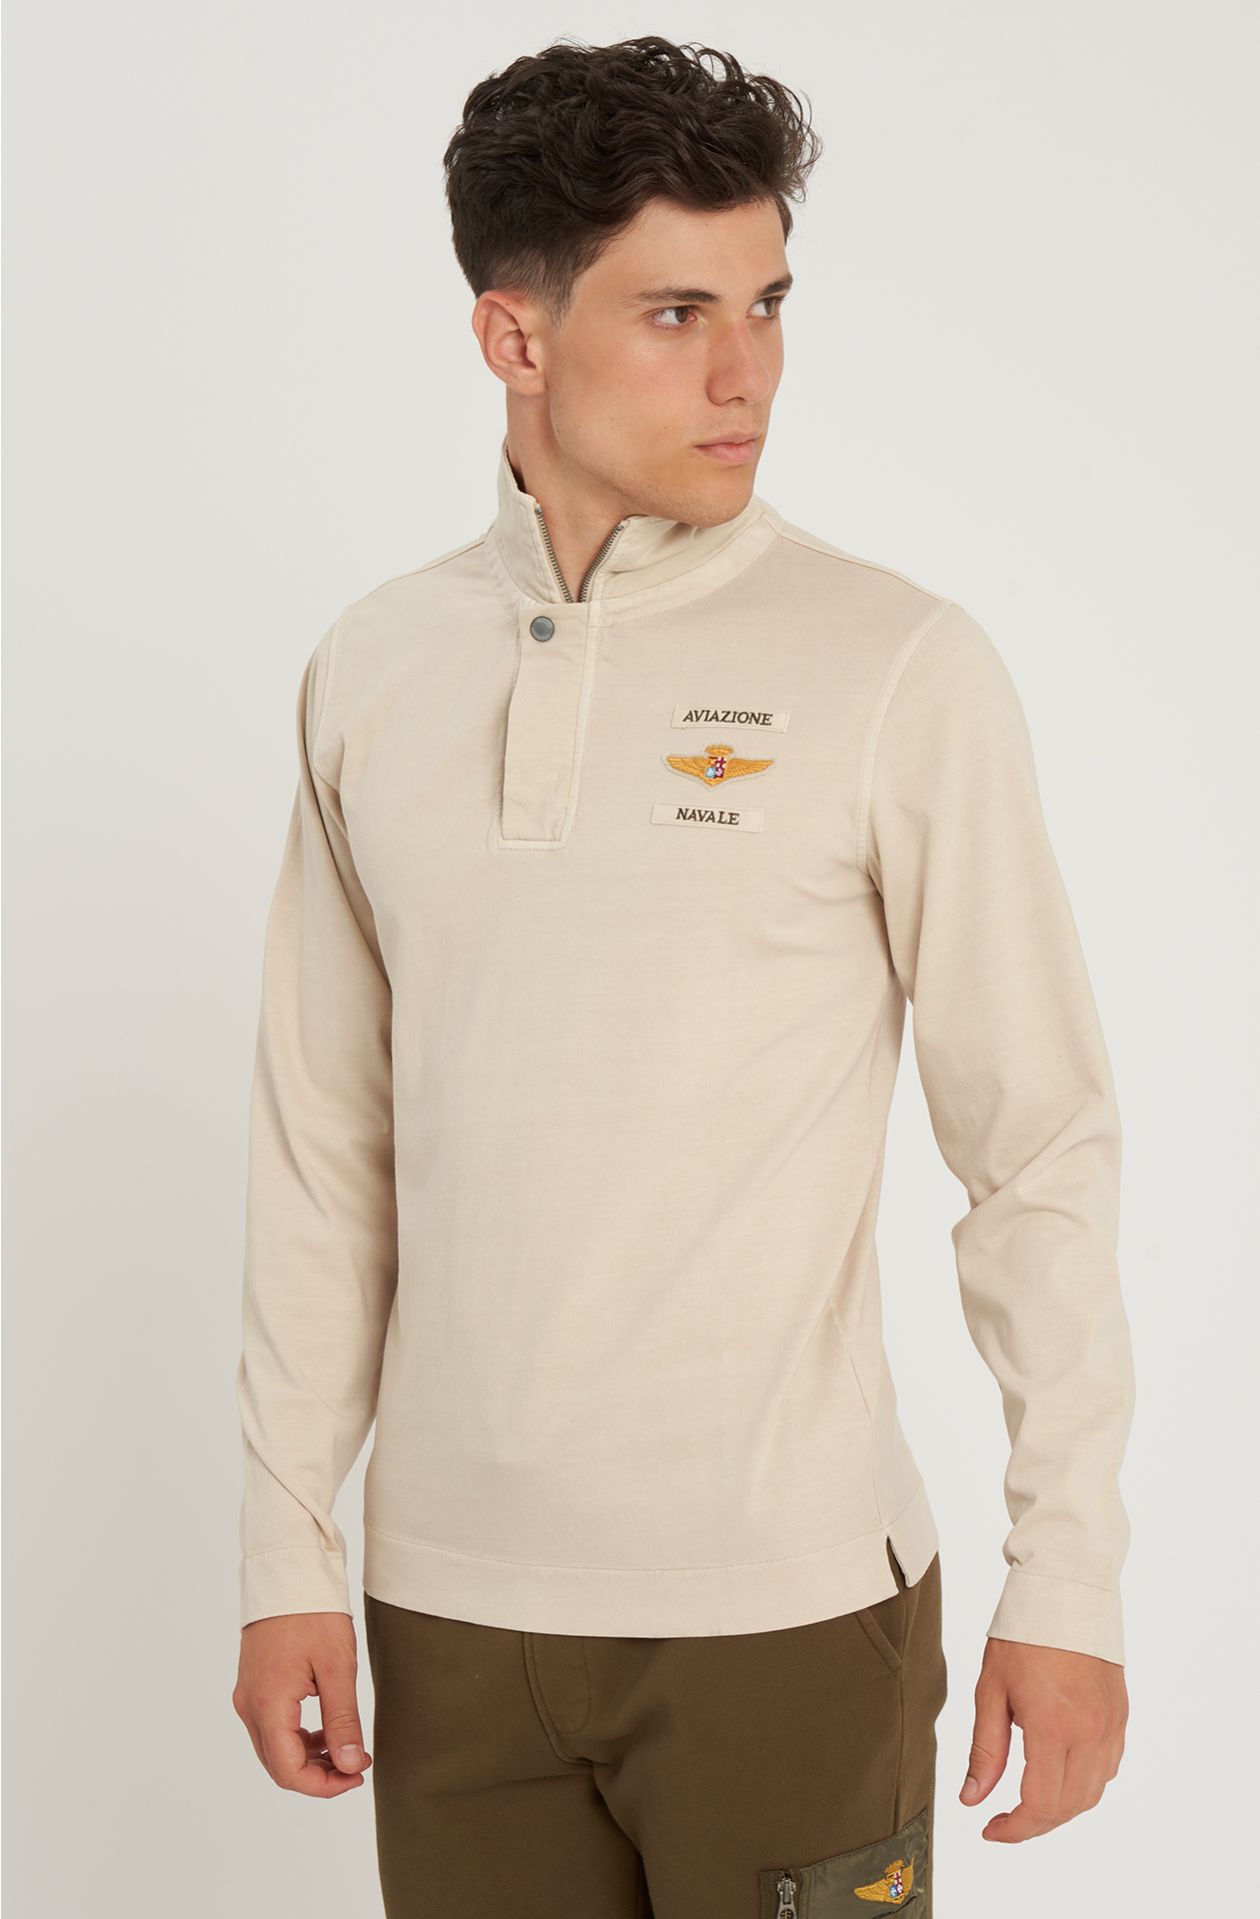 Polo in pure cotton jersey Aviation Naval